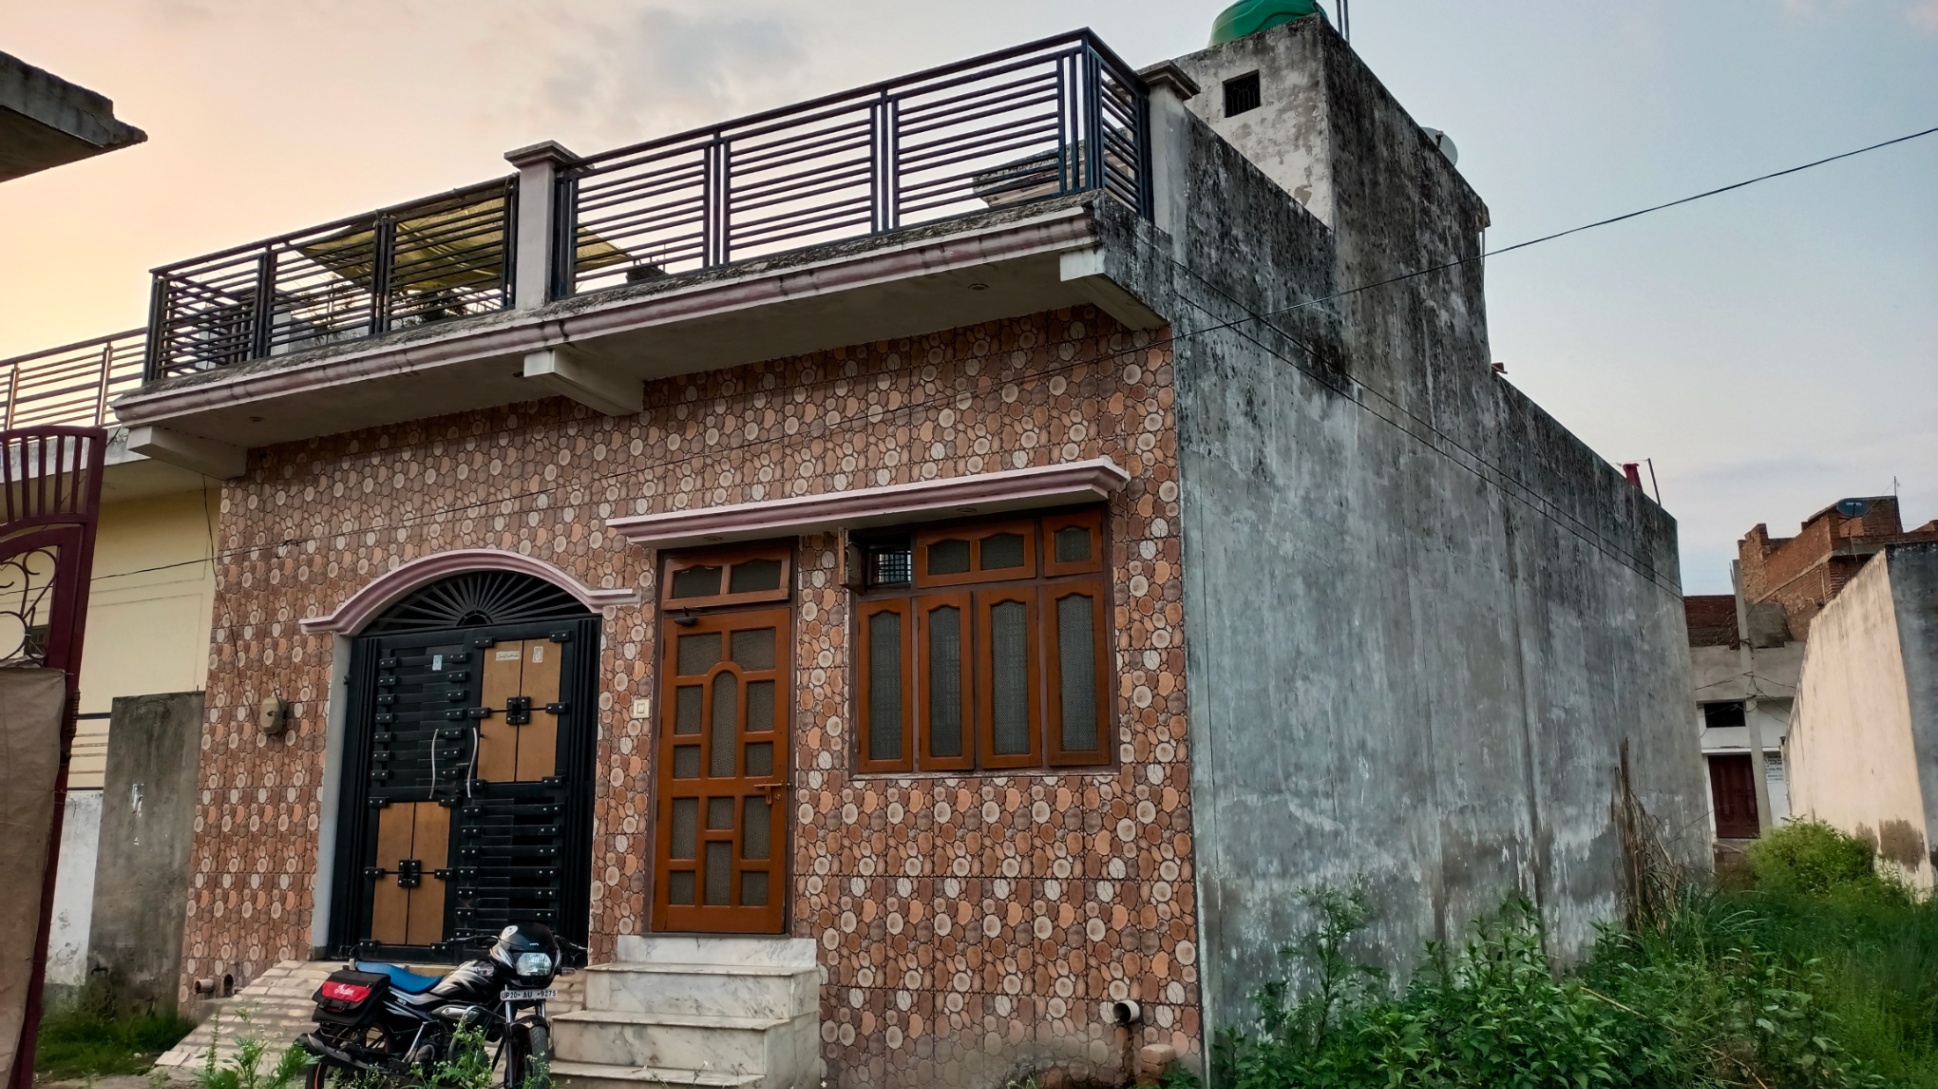 3 Bed/ 2 Bath Sell House/ Bungalow/ Villa; 1,300 sq. ft. carpet area; 150 sq. ft. lot for sale @Near haridwar bypass